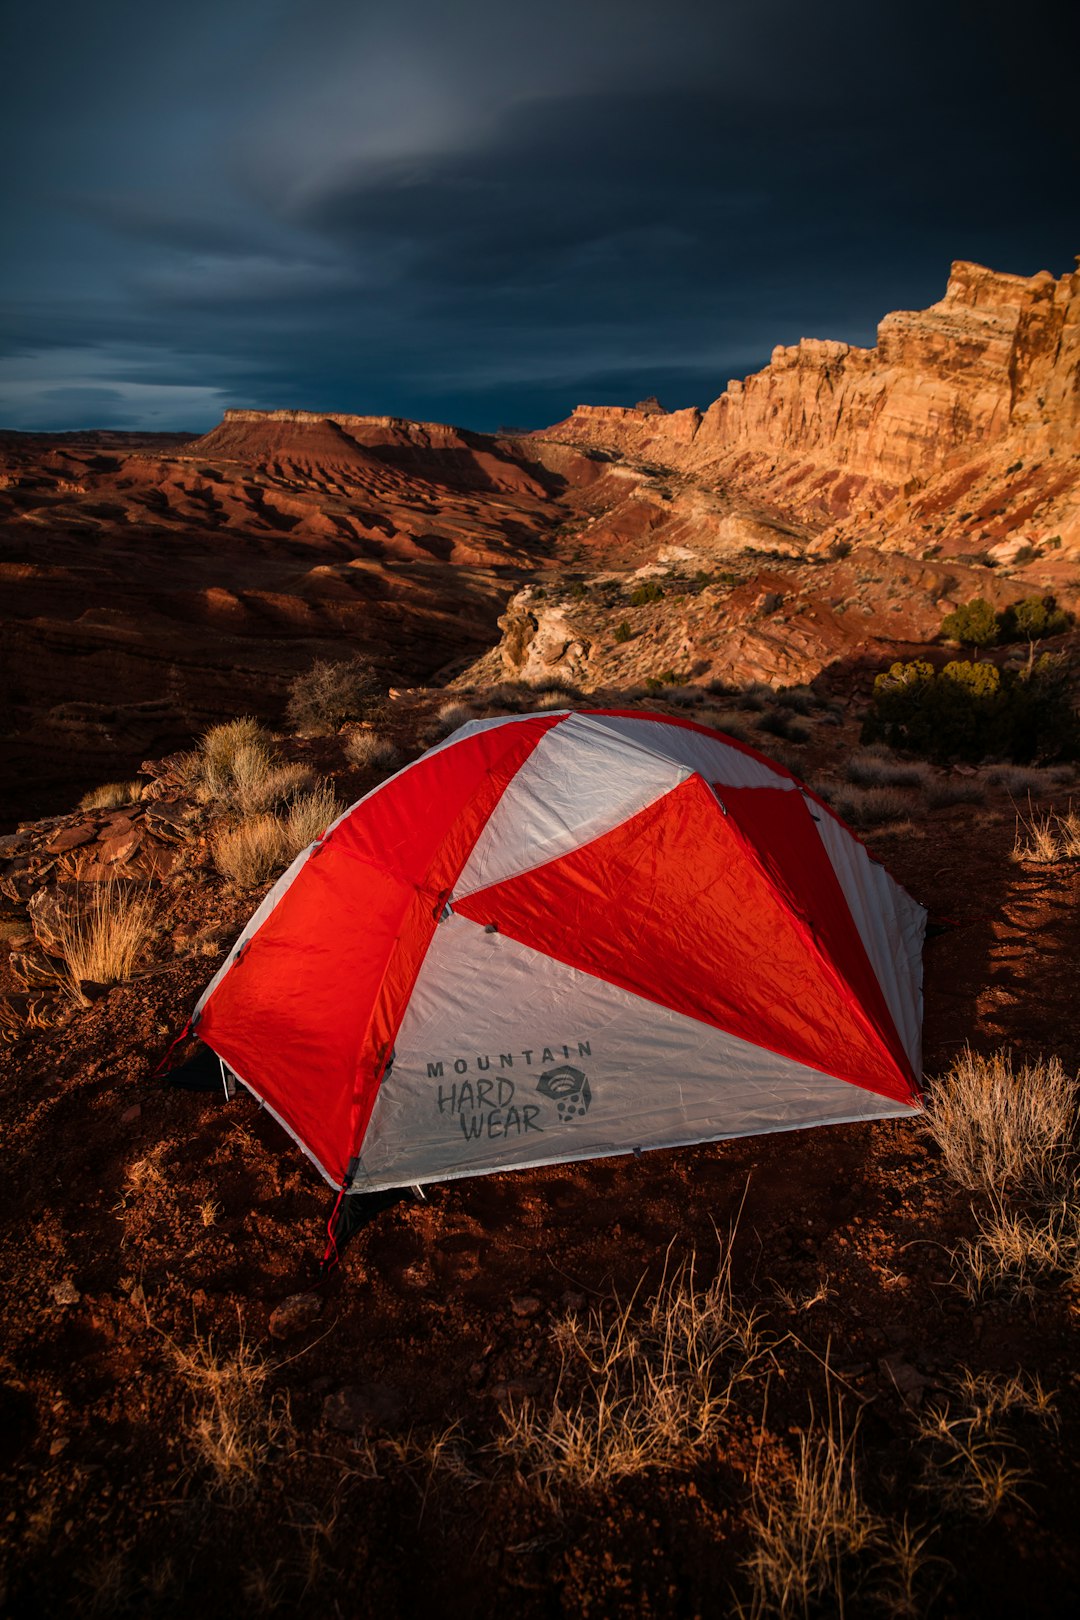 red and white Mountain Hard Wear tent on ground beside rock formation